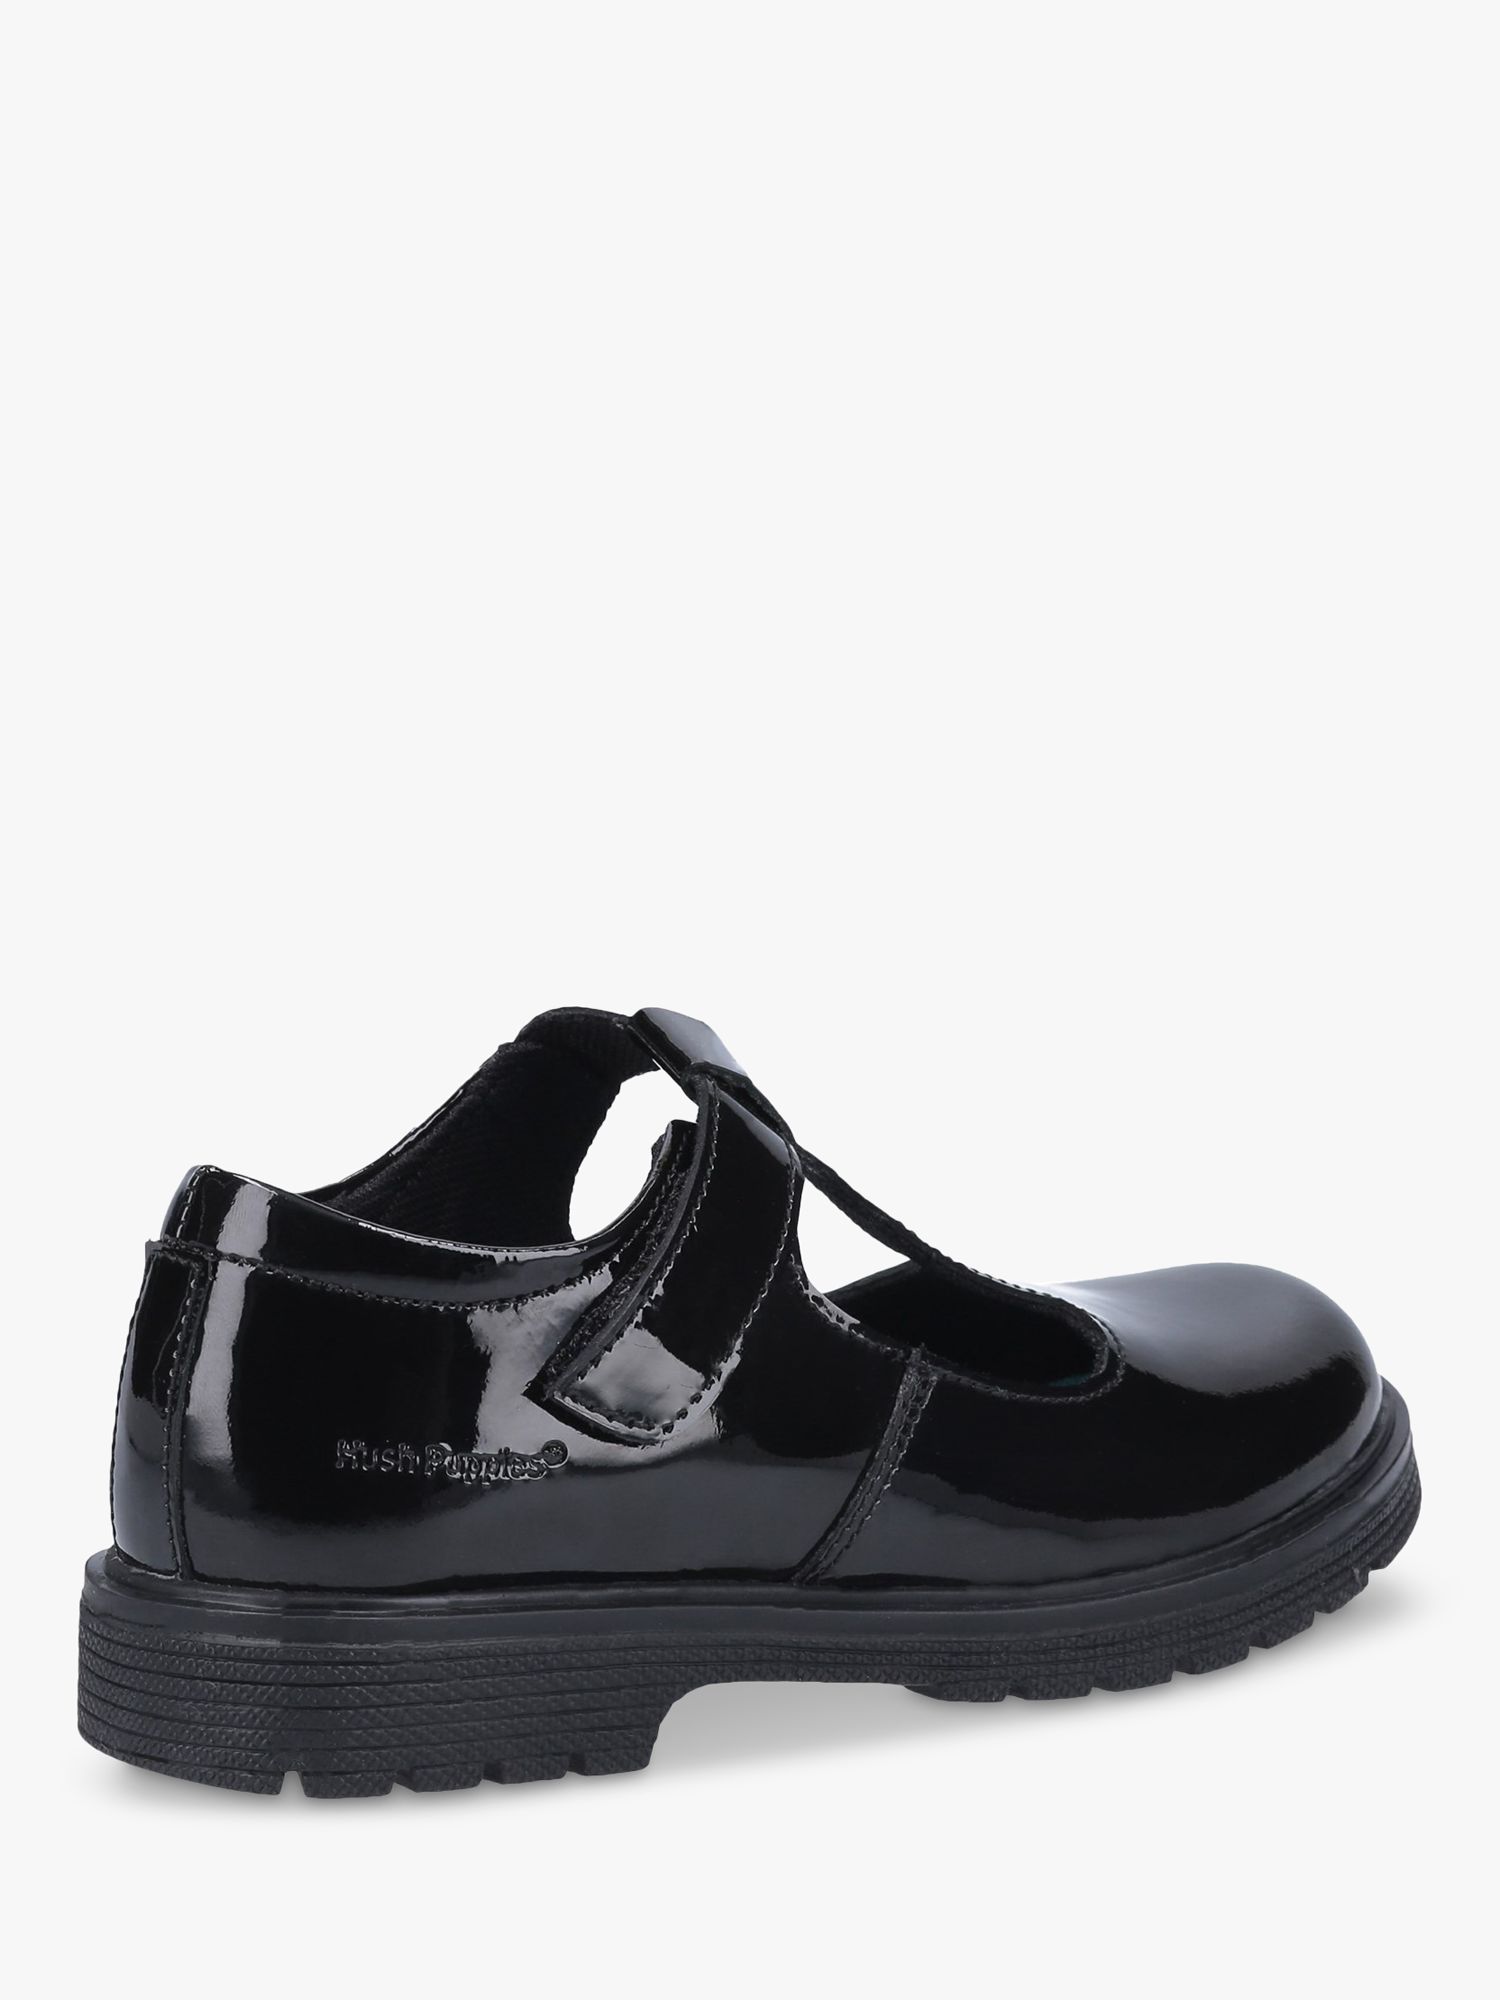 Buy Hush Puppies Kids Gracie Senior Leather T-Bar Mary Jane Shoes, Patent Black Online at johnlewis.com